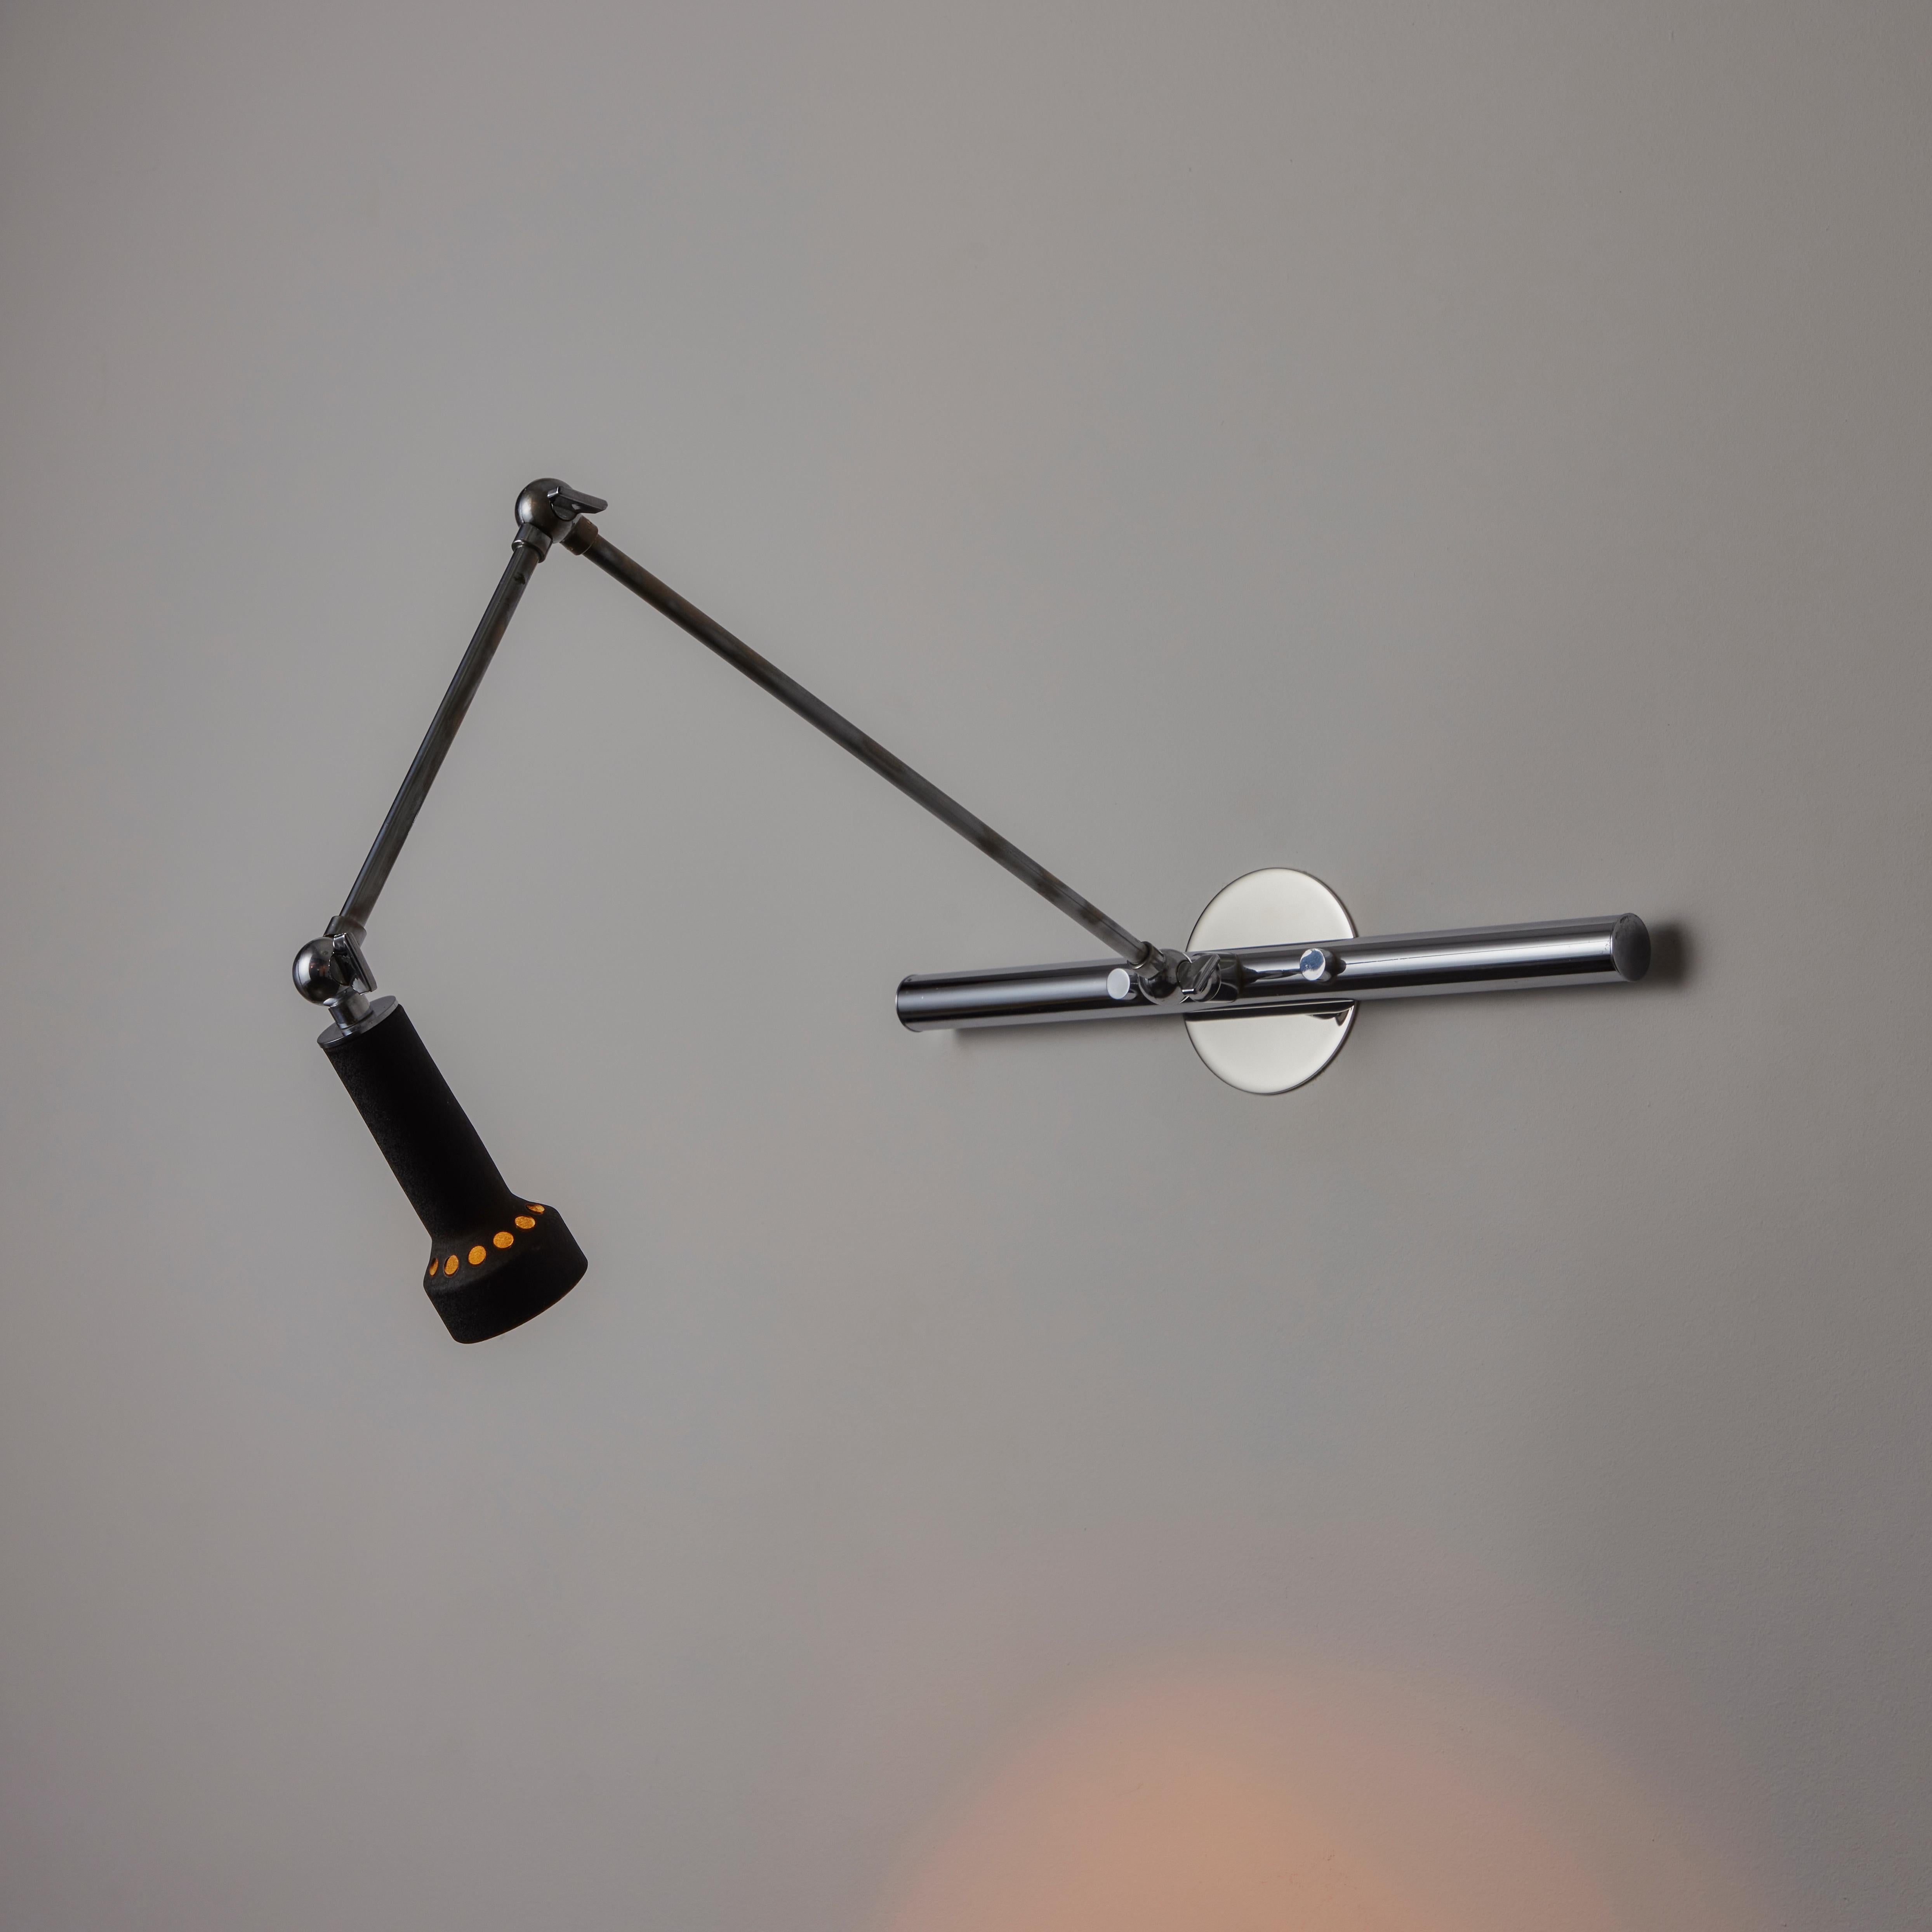 Wall Sconce by Angelo Lelii for Arredoluce. Designed and manufactured in Italy, circa the 1950s. A picture light or wall sconce consisting of a multiple articulating chrome armature and enameled black shade. The arms can be manipulated by adjstign